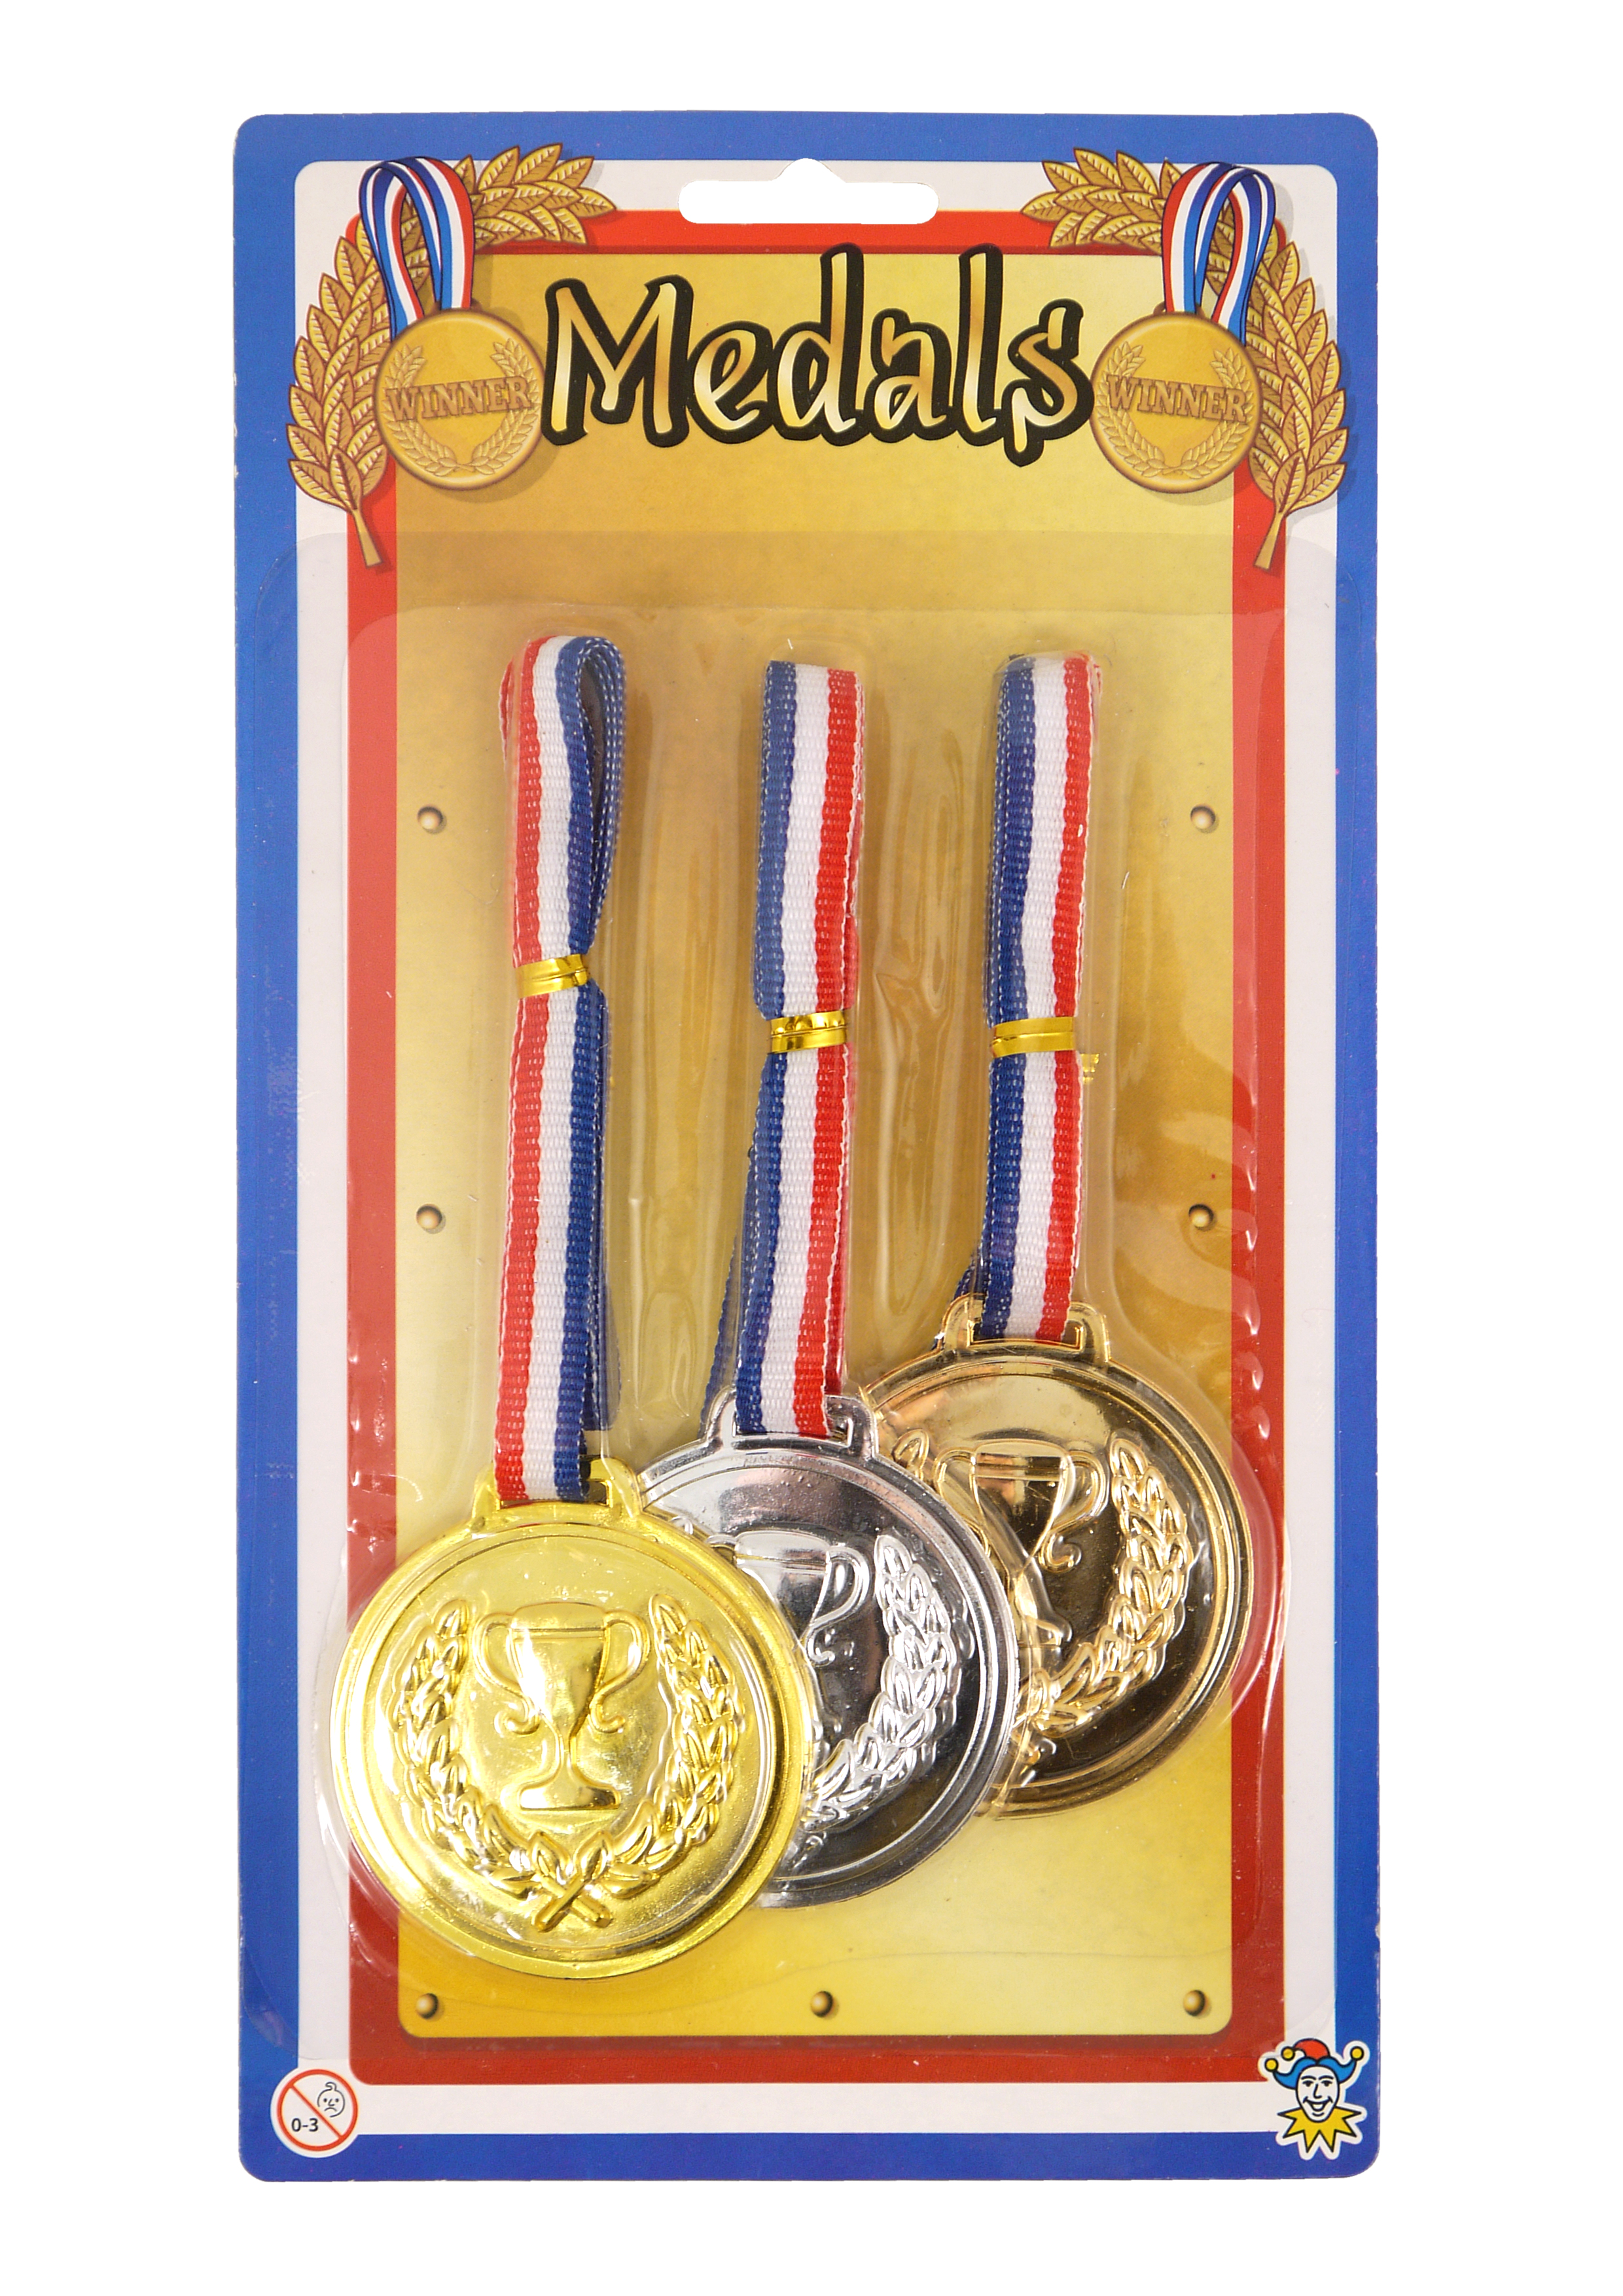 1 Joblot of Clearance toy medals, Gold , Silver, Bronze with Neck Cords x 198 units